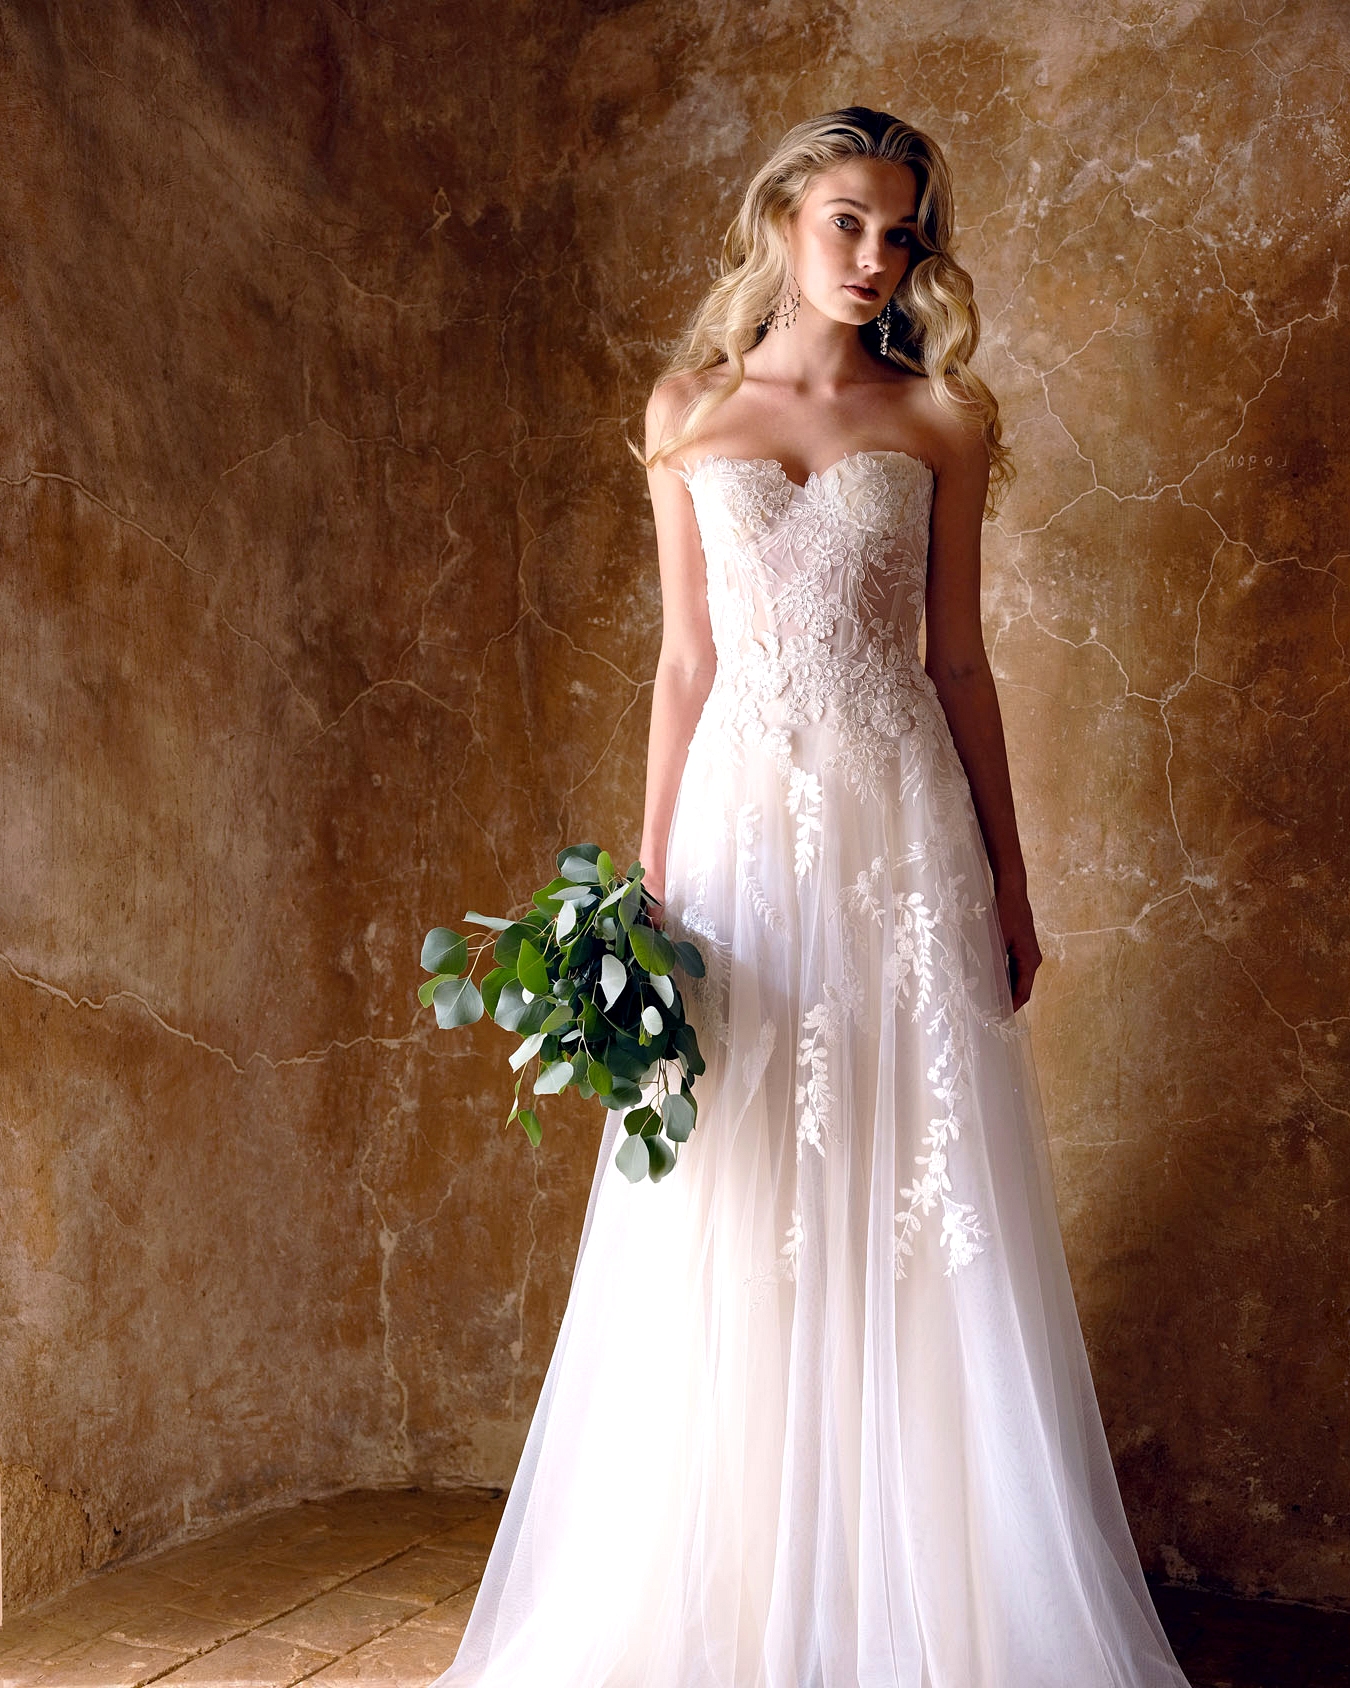 The New Ellen Wise Couture Bridal Collection Where Delicate Meets ...